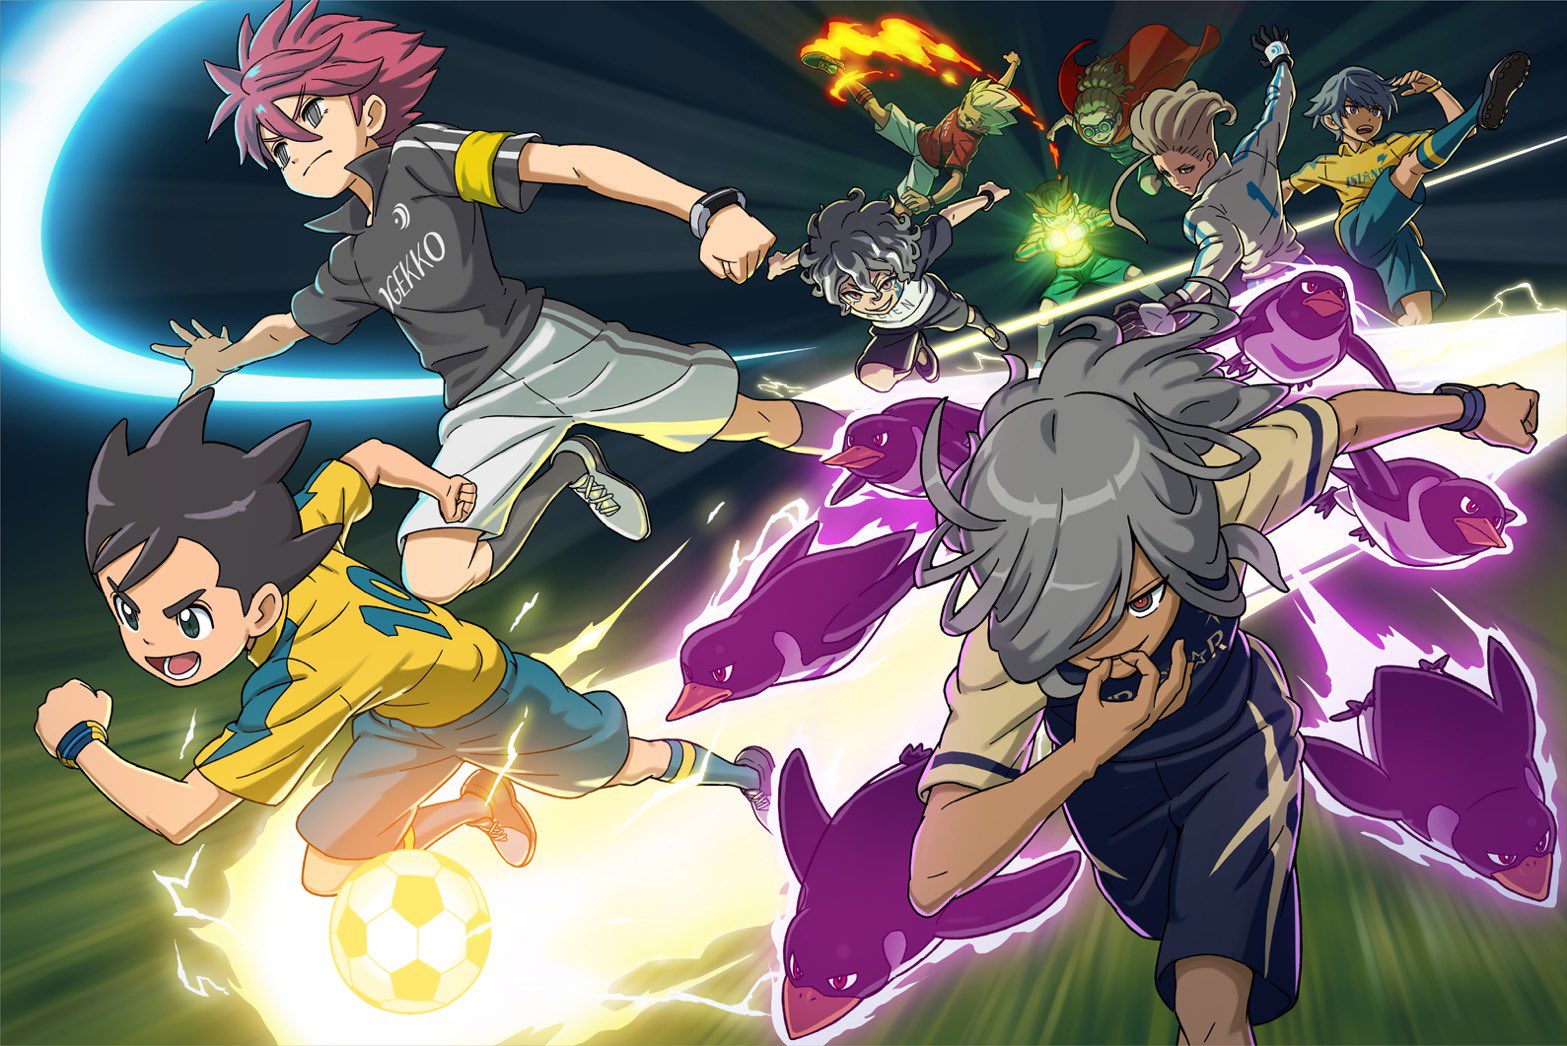 Inazuma eleven: great road of heroes